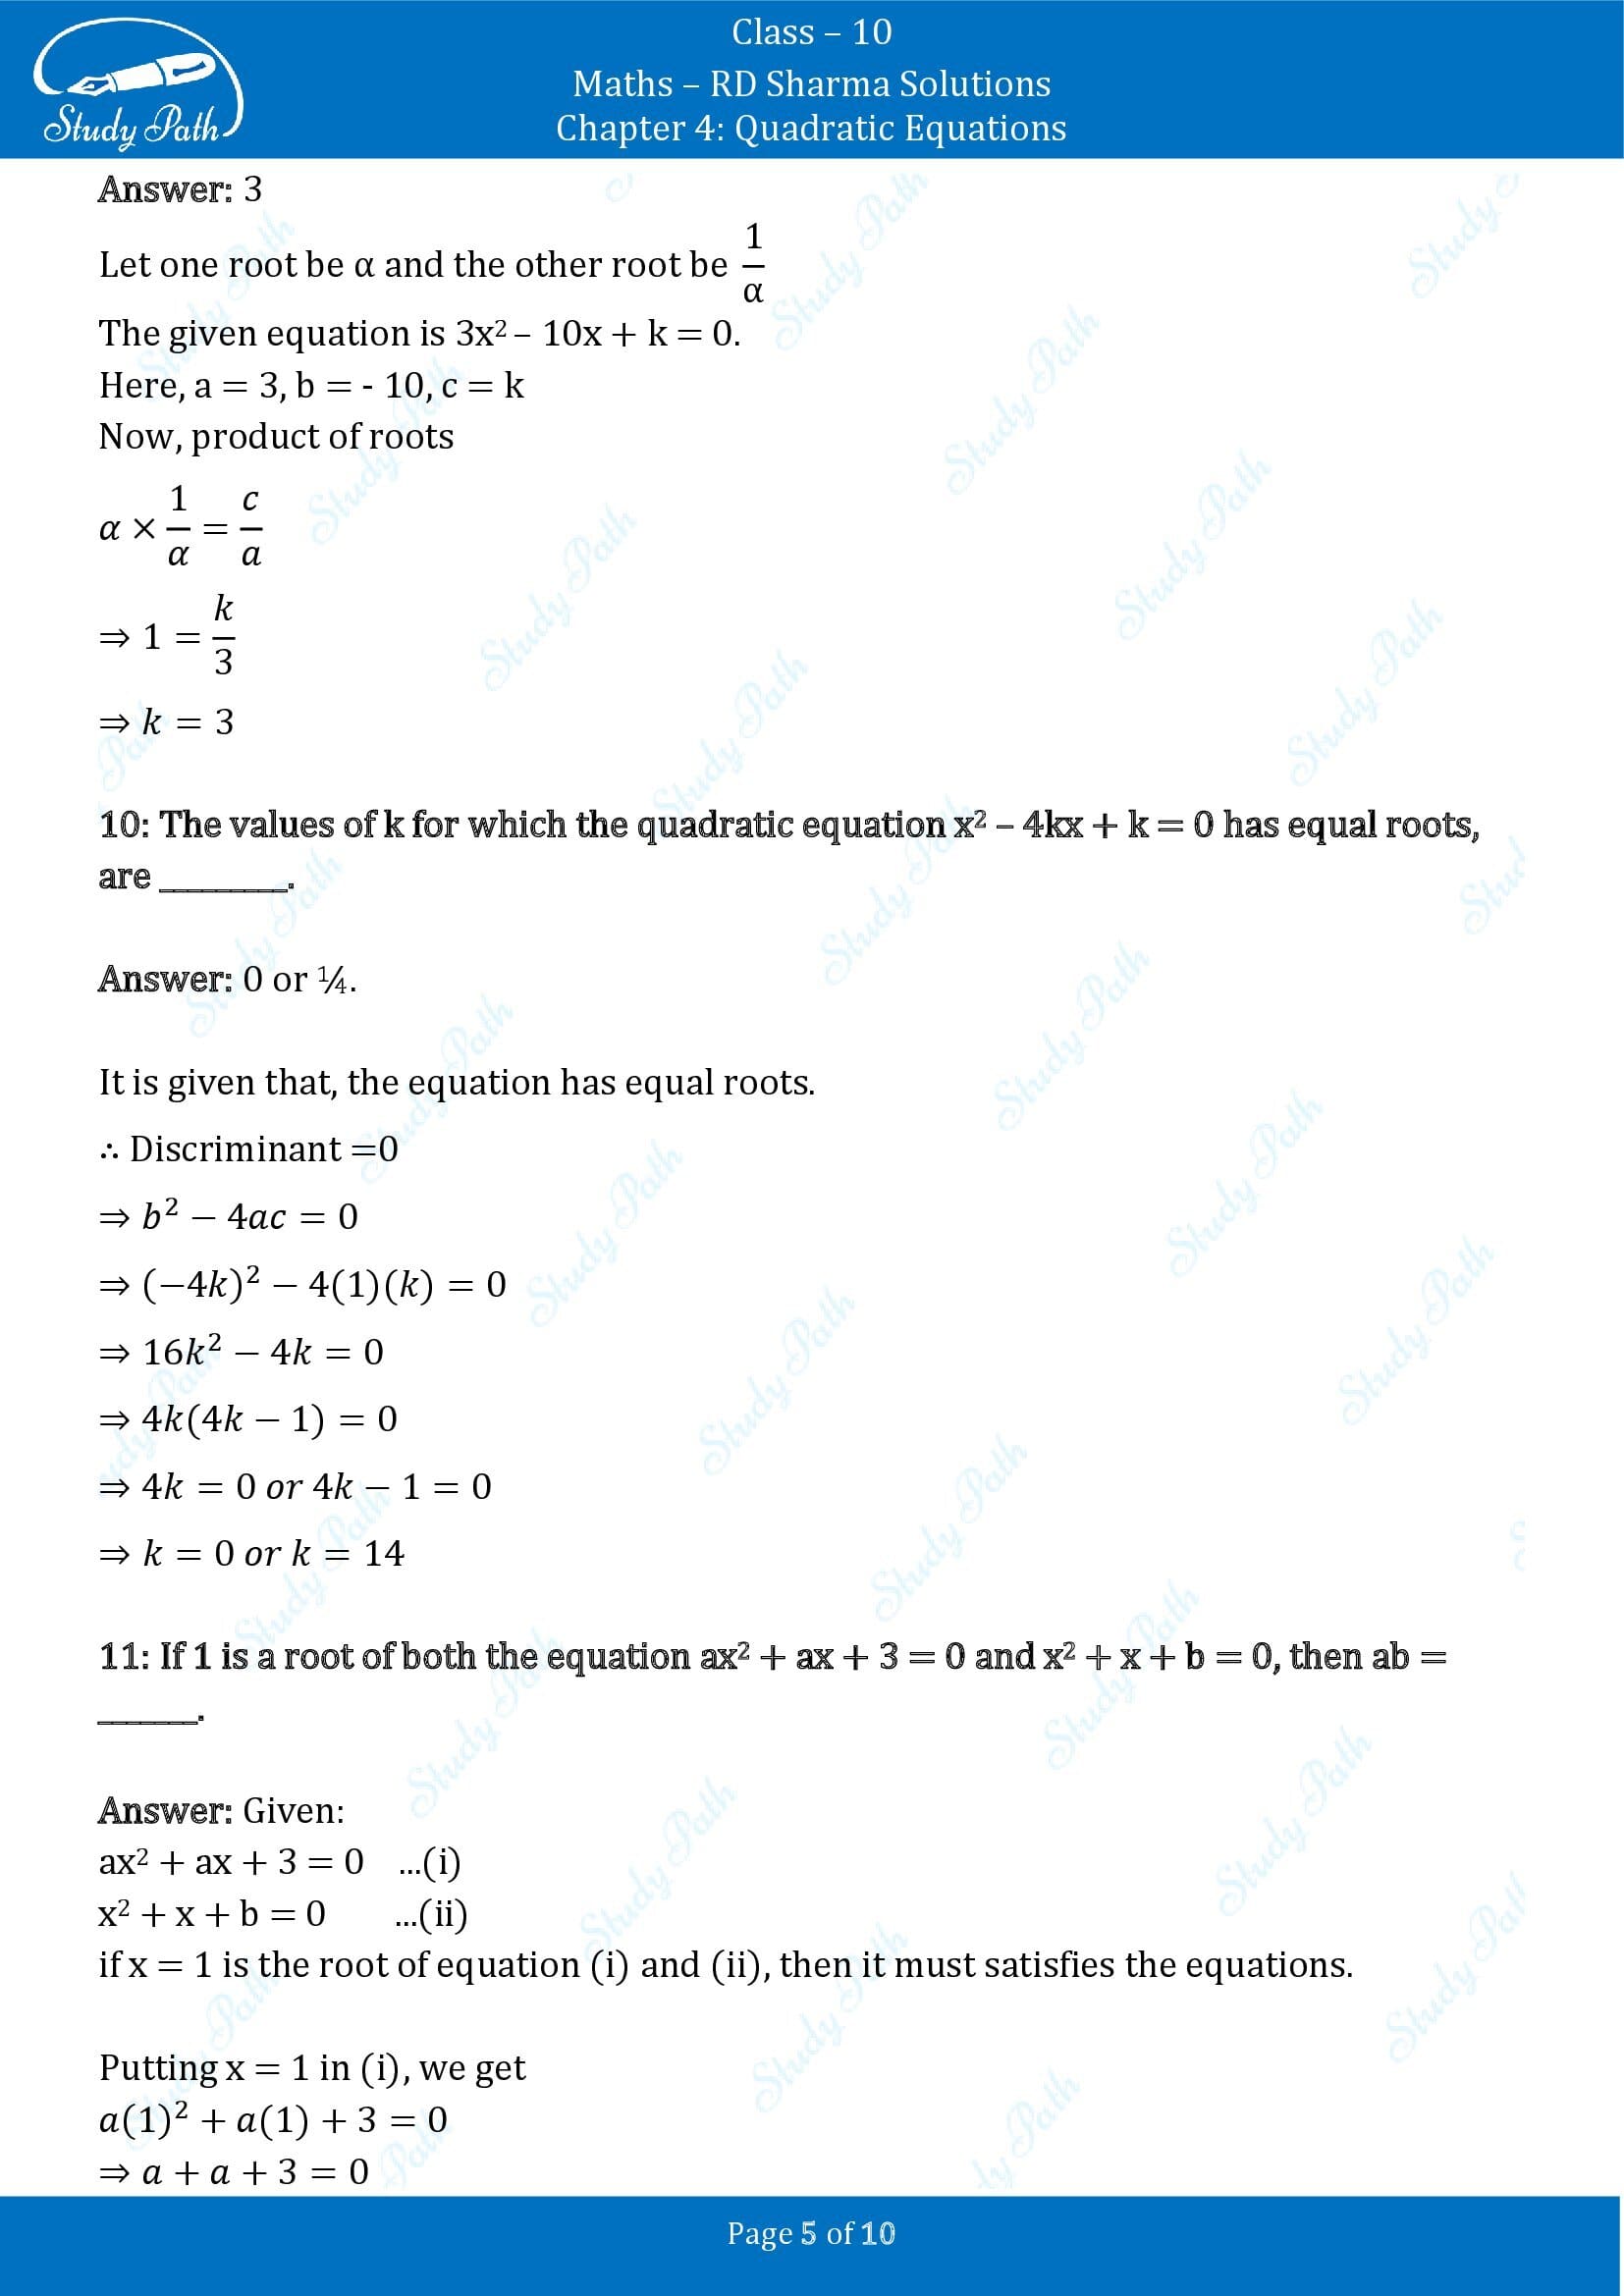 RD Sharma Solutions Class 10 Chapter 4 Quadratic Equations Fill in the Blank Type Questions FBQs 00005